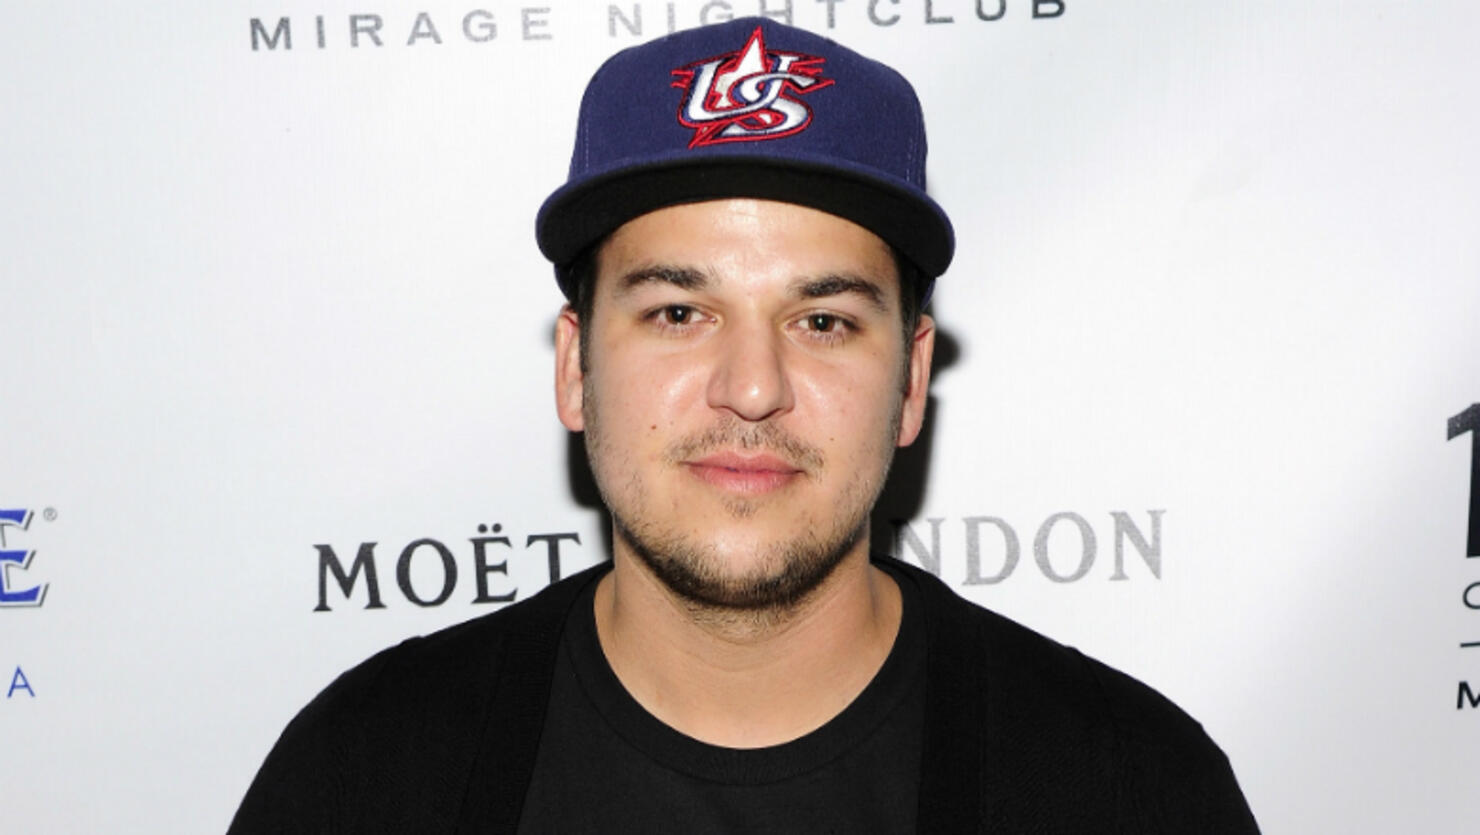 Rob Kardashian cuts a much slimmer frame as he takes his